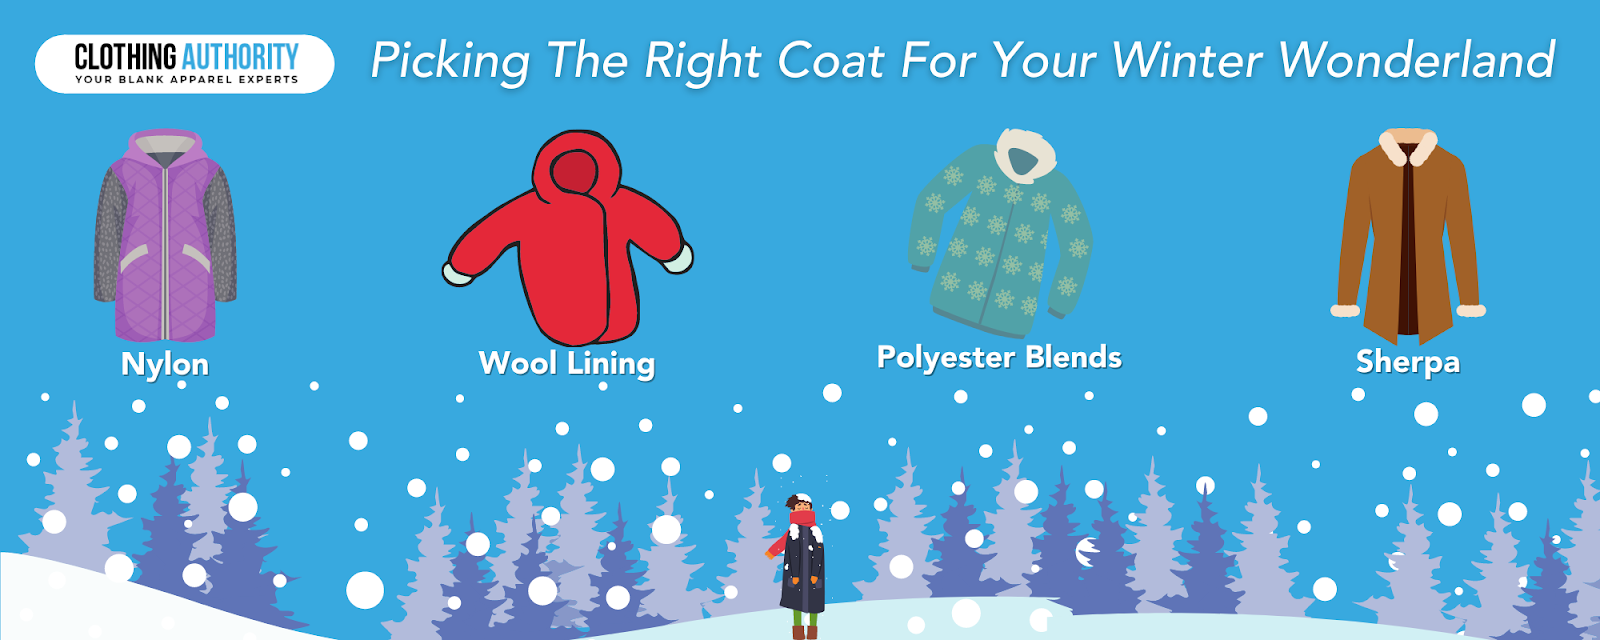 Image: Picking the right coat for your winter wonderland - Clothing Authority blog.